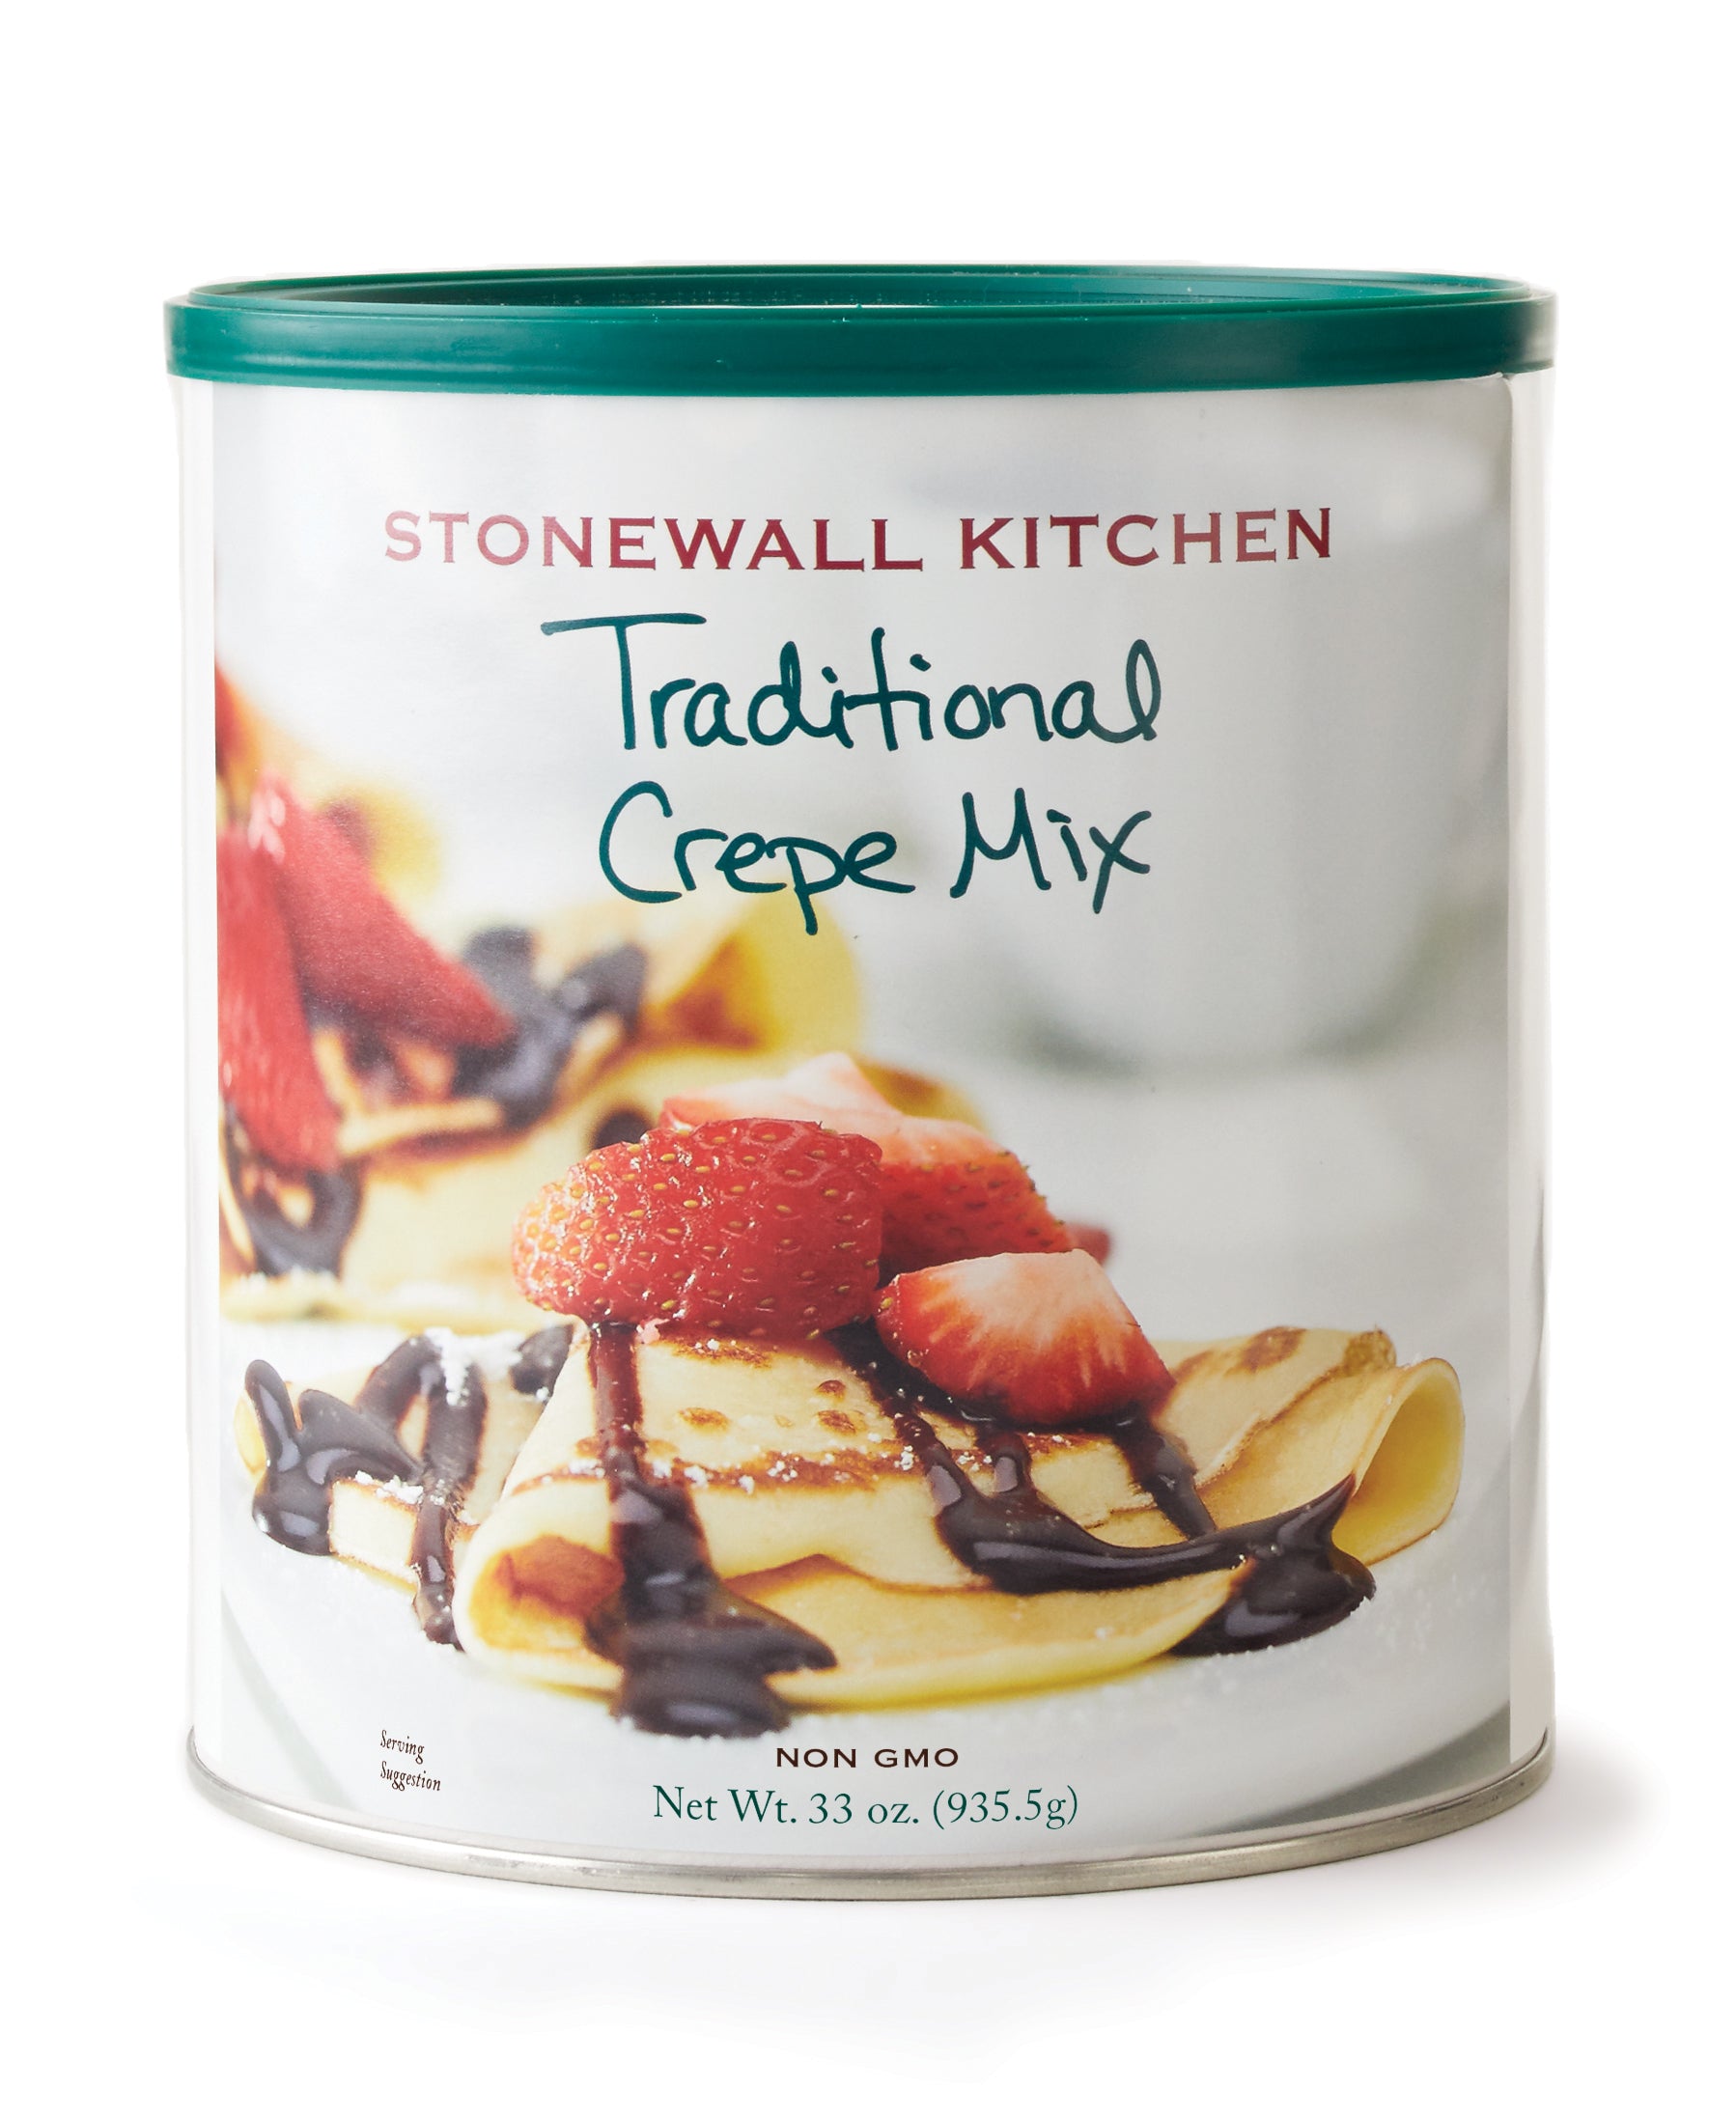 Stonewall Kitchen Traditional Crepe Mix - Olive Oil Etcetera 